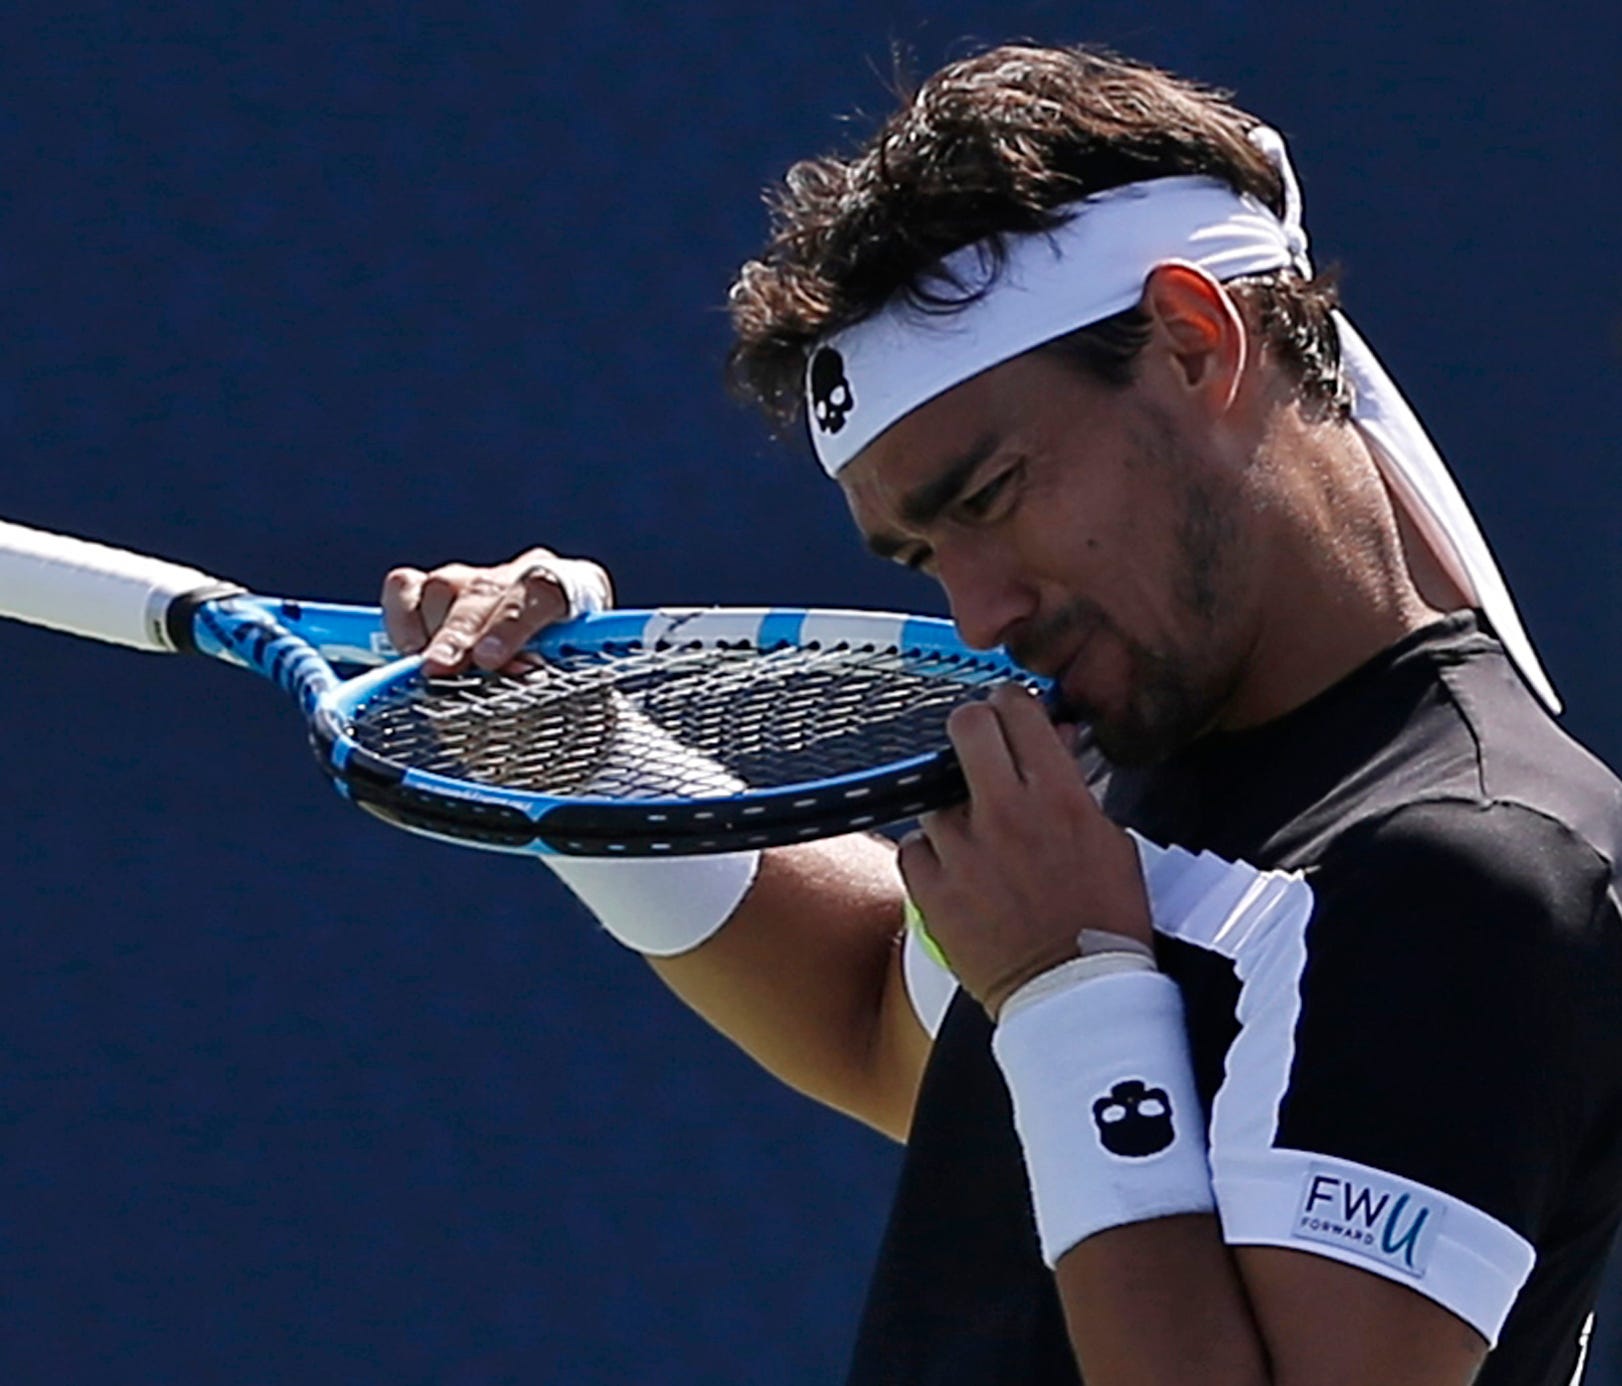 Fabio Fognini, of Italy, reacts after losing a point to Stefano Travaglia, of Italy, during the first round of the U.S. Open on Aug. 30.